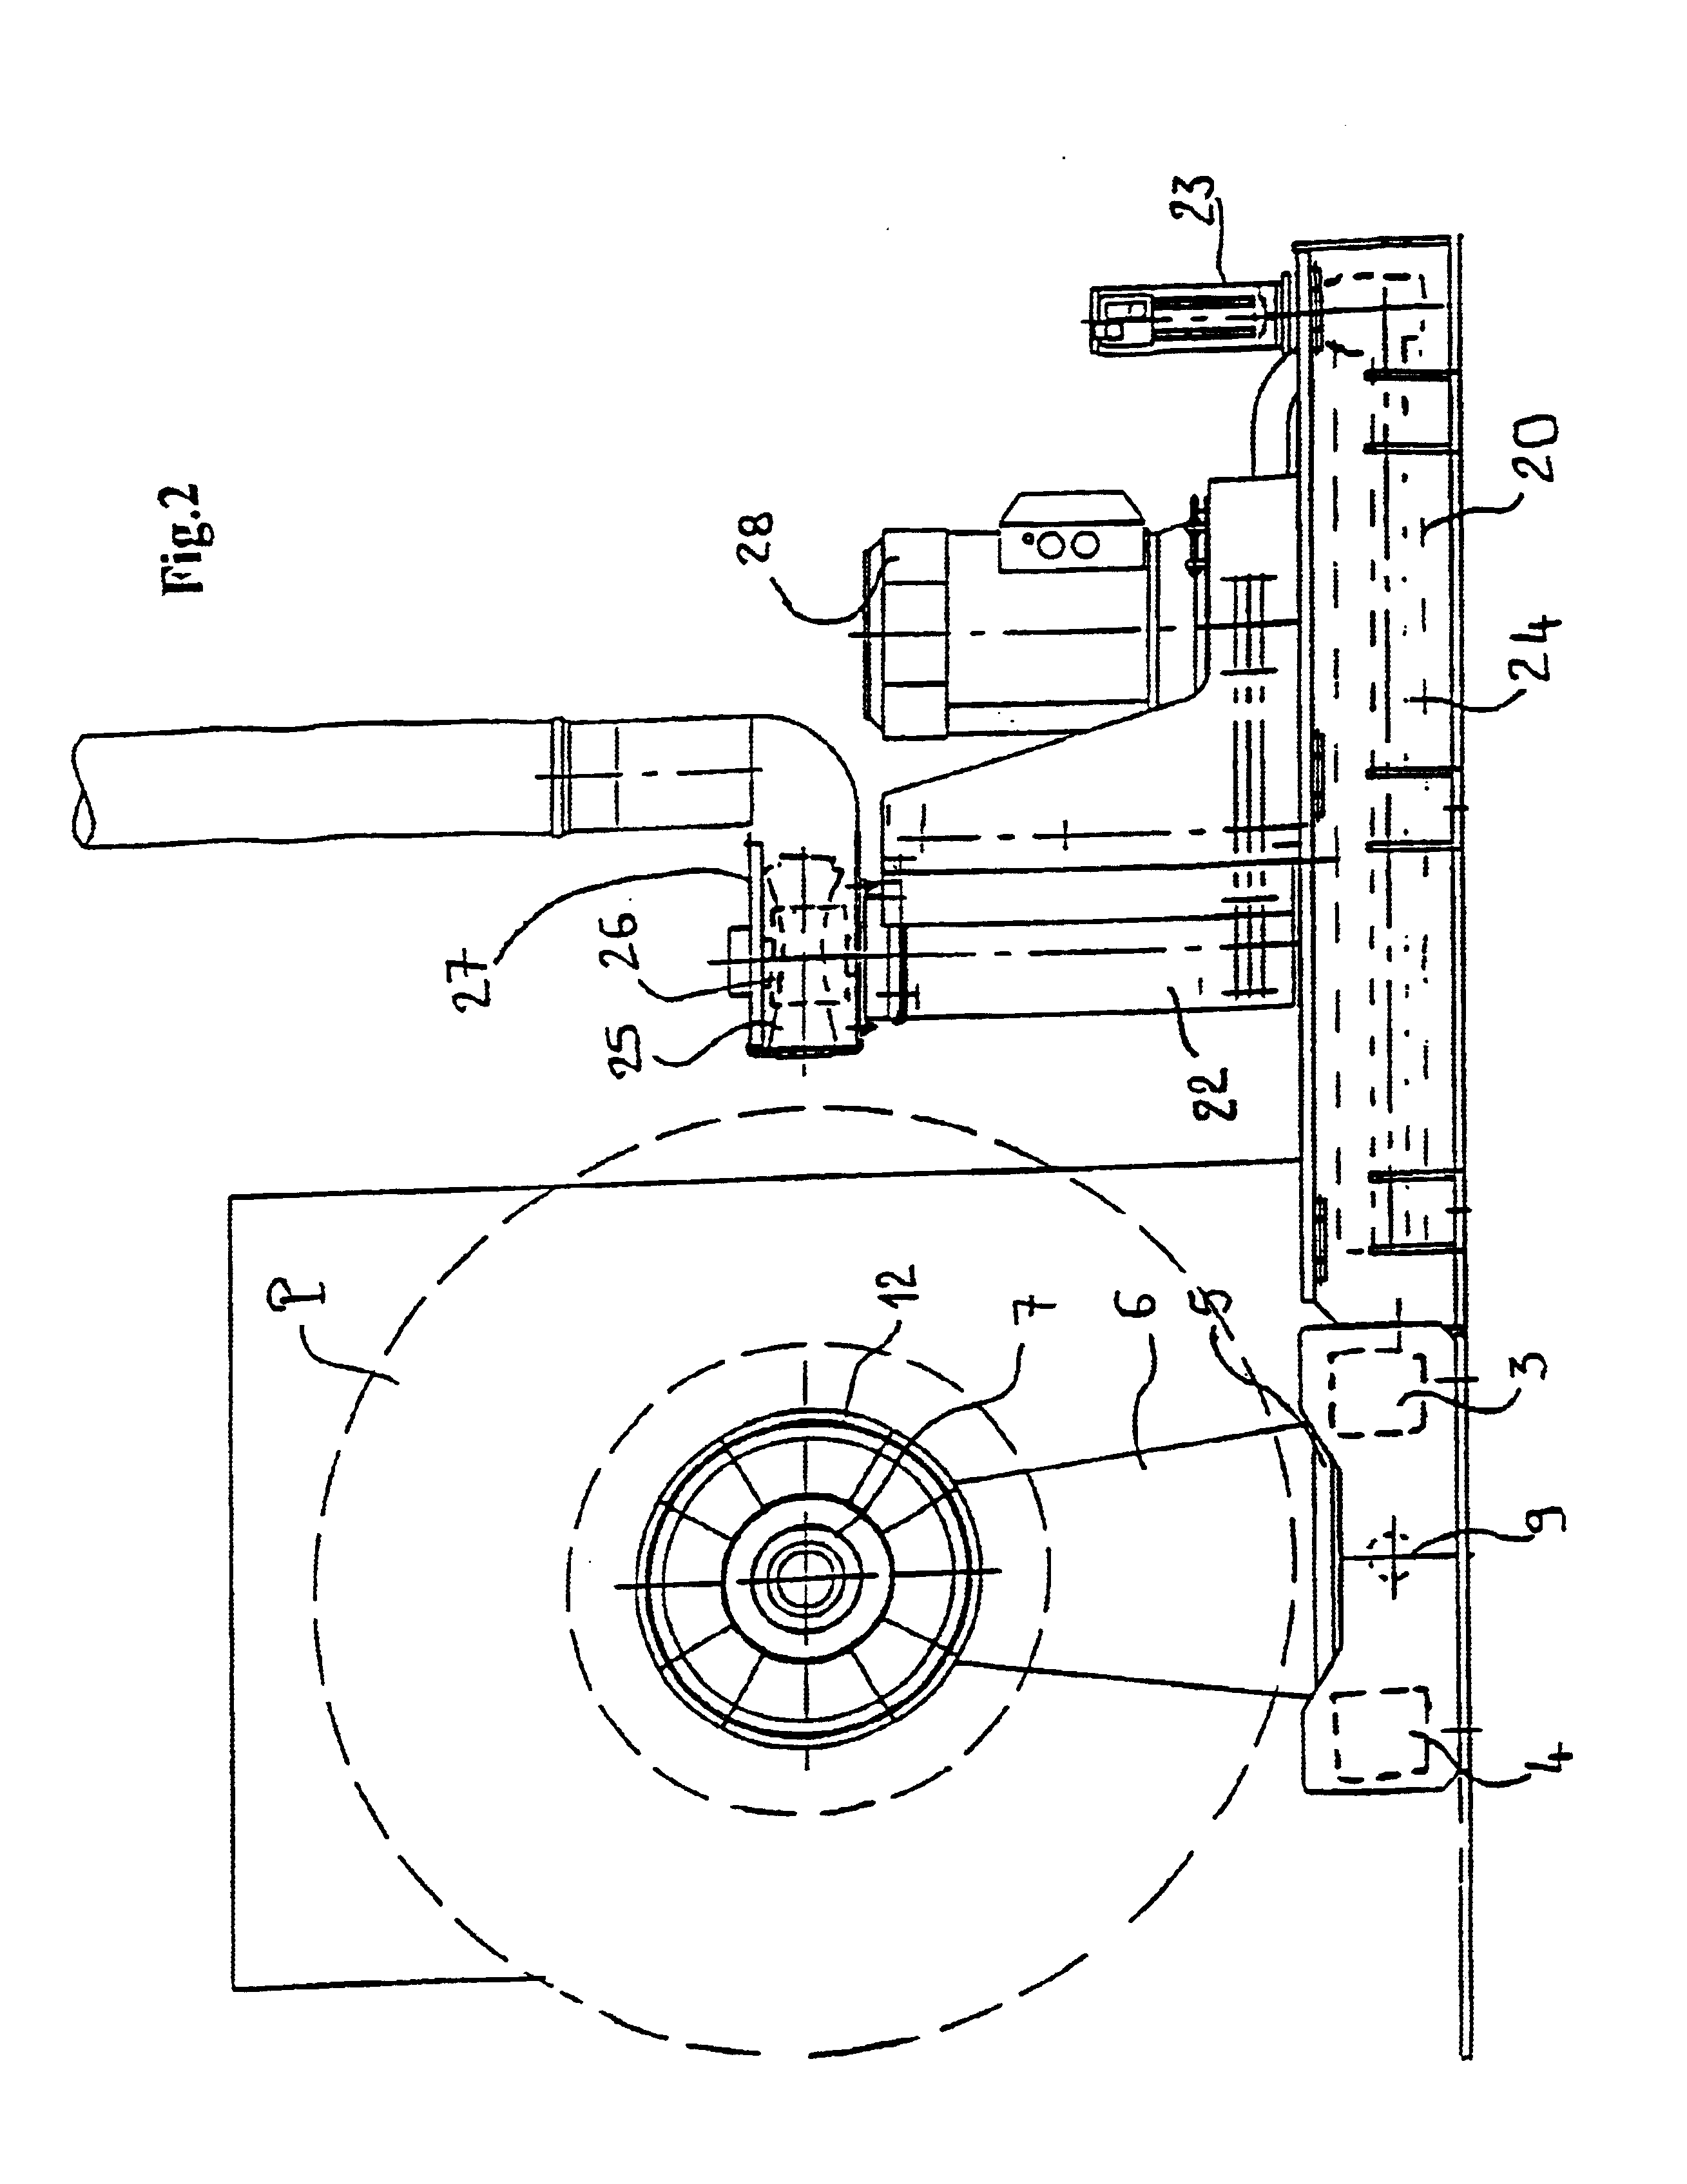 Apparatus for recapping tires